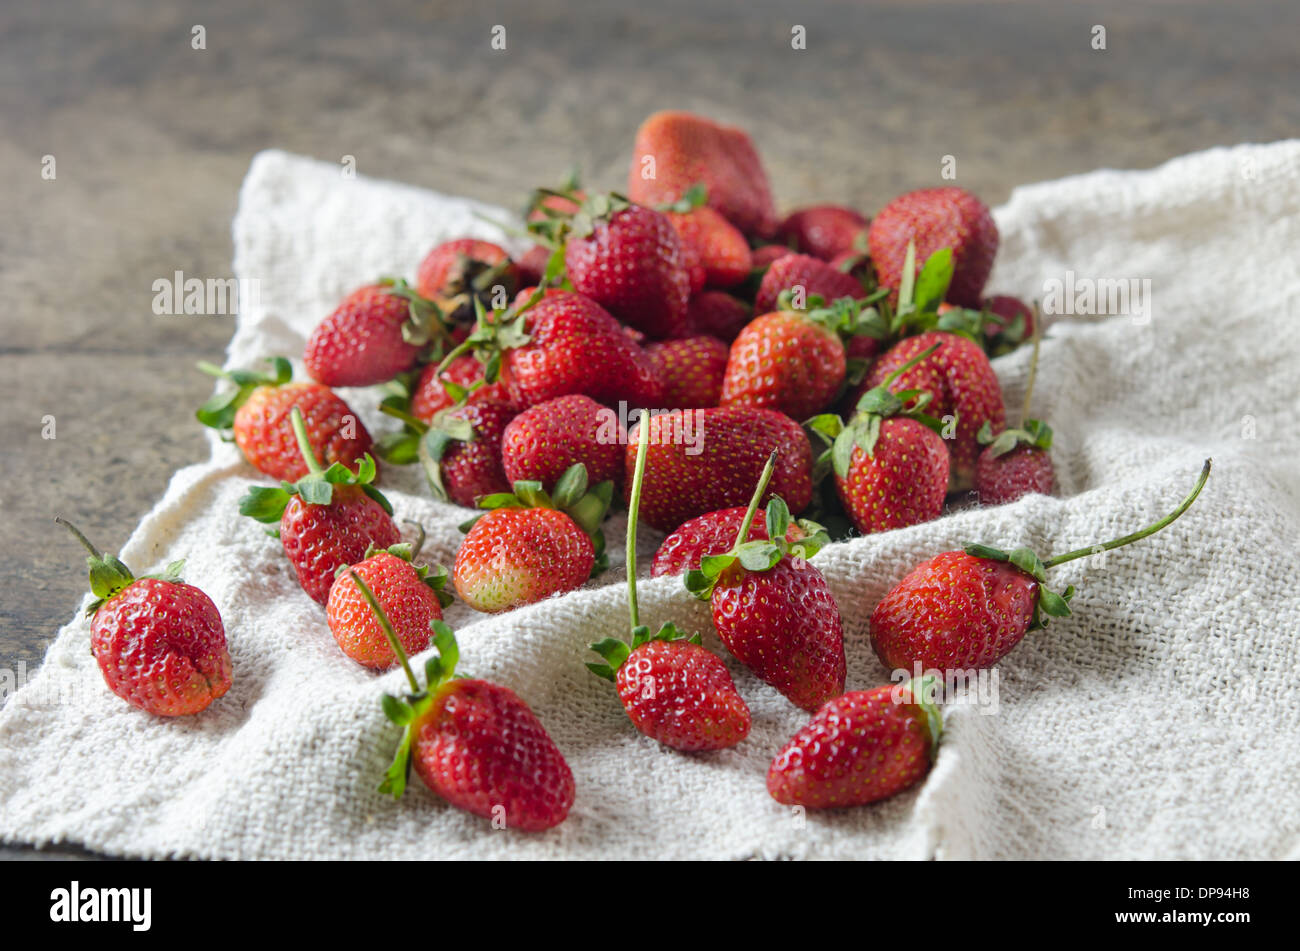 fresh ripe red strawberries on sackcloth over wooden background Stock Photo